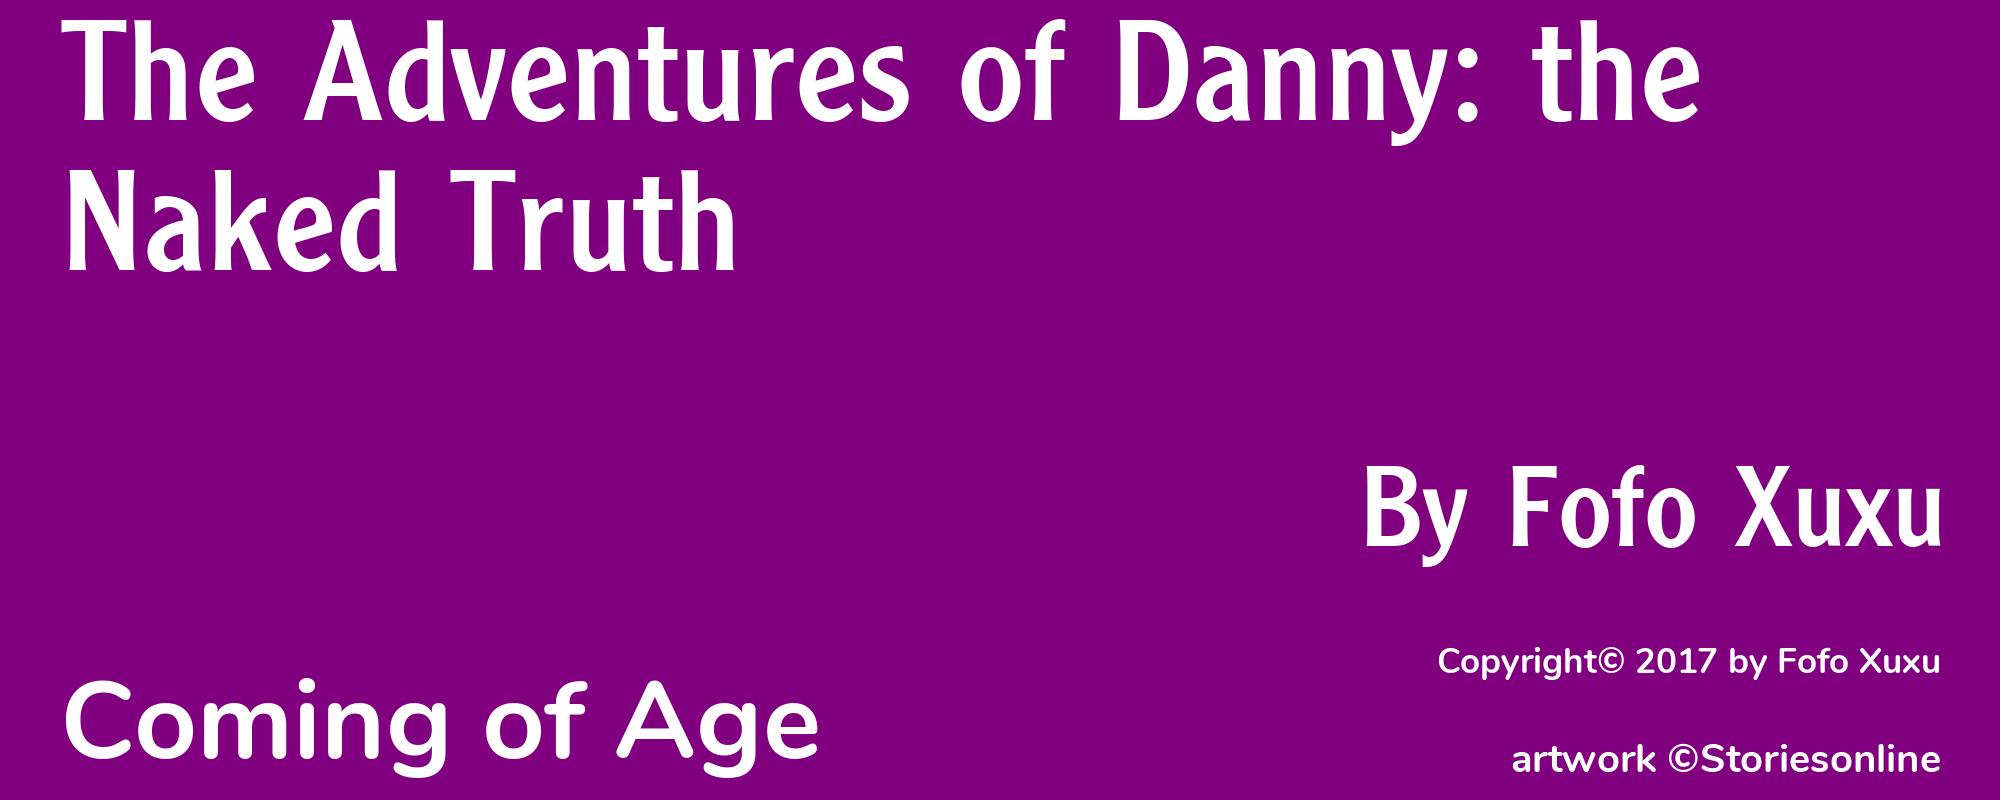 The Adventures of Danny: the Naked Truth - Cover